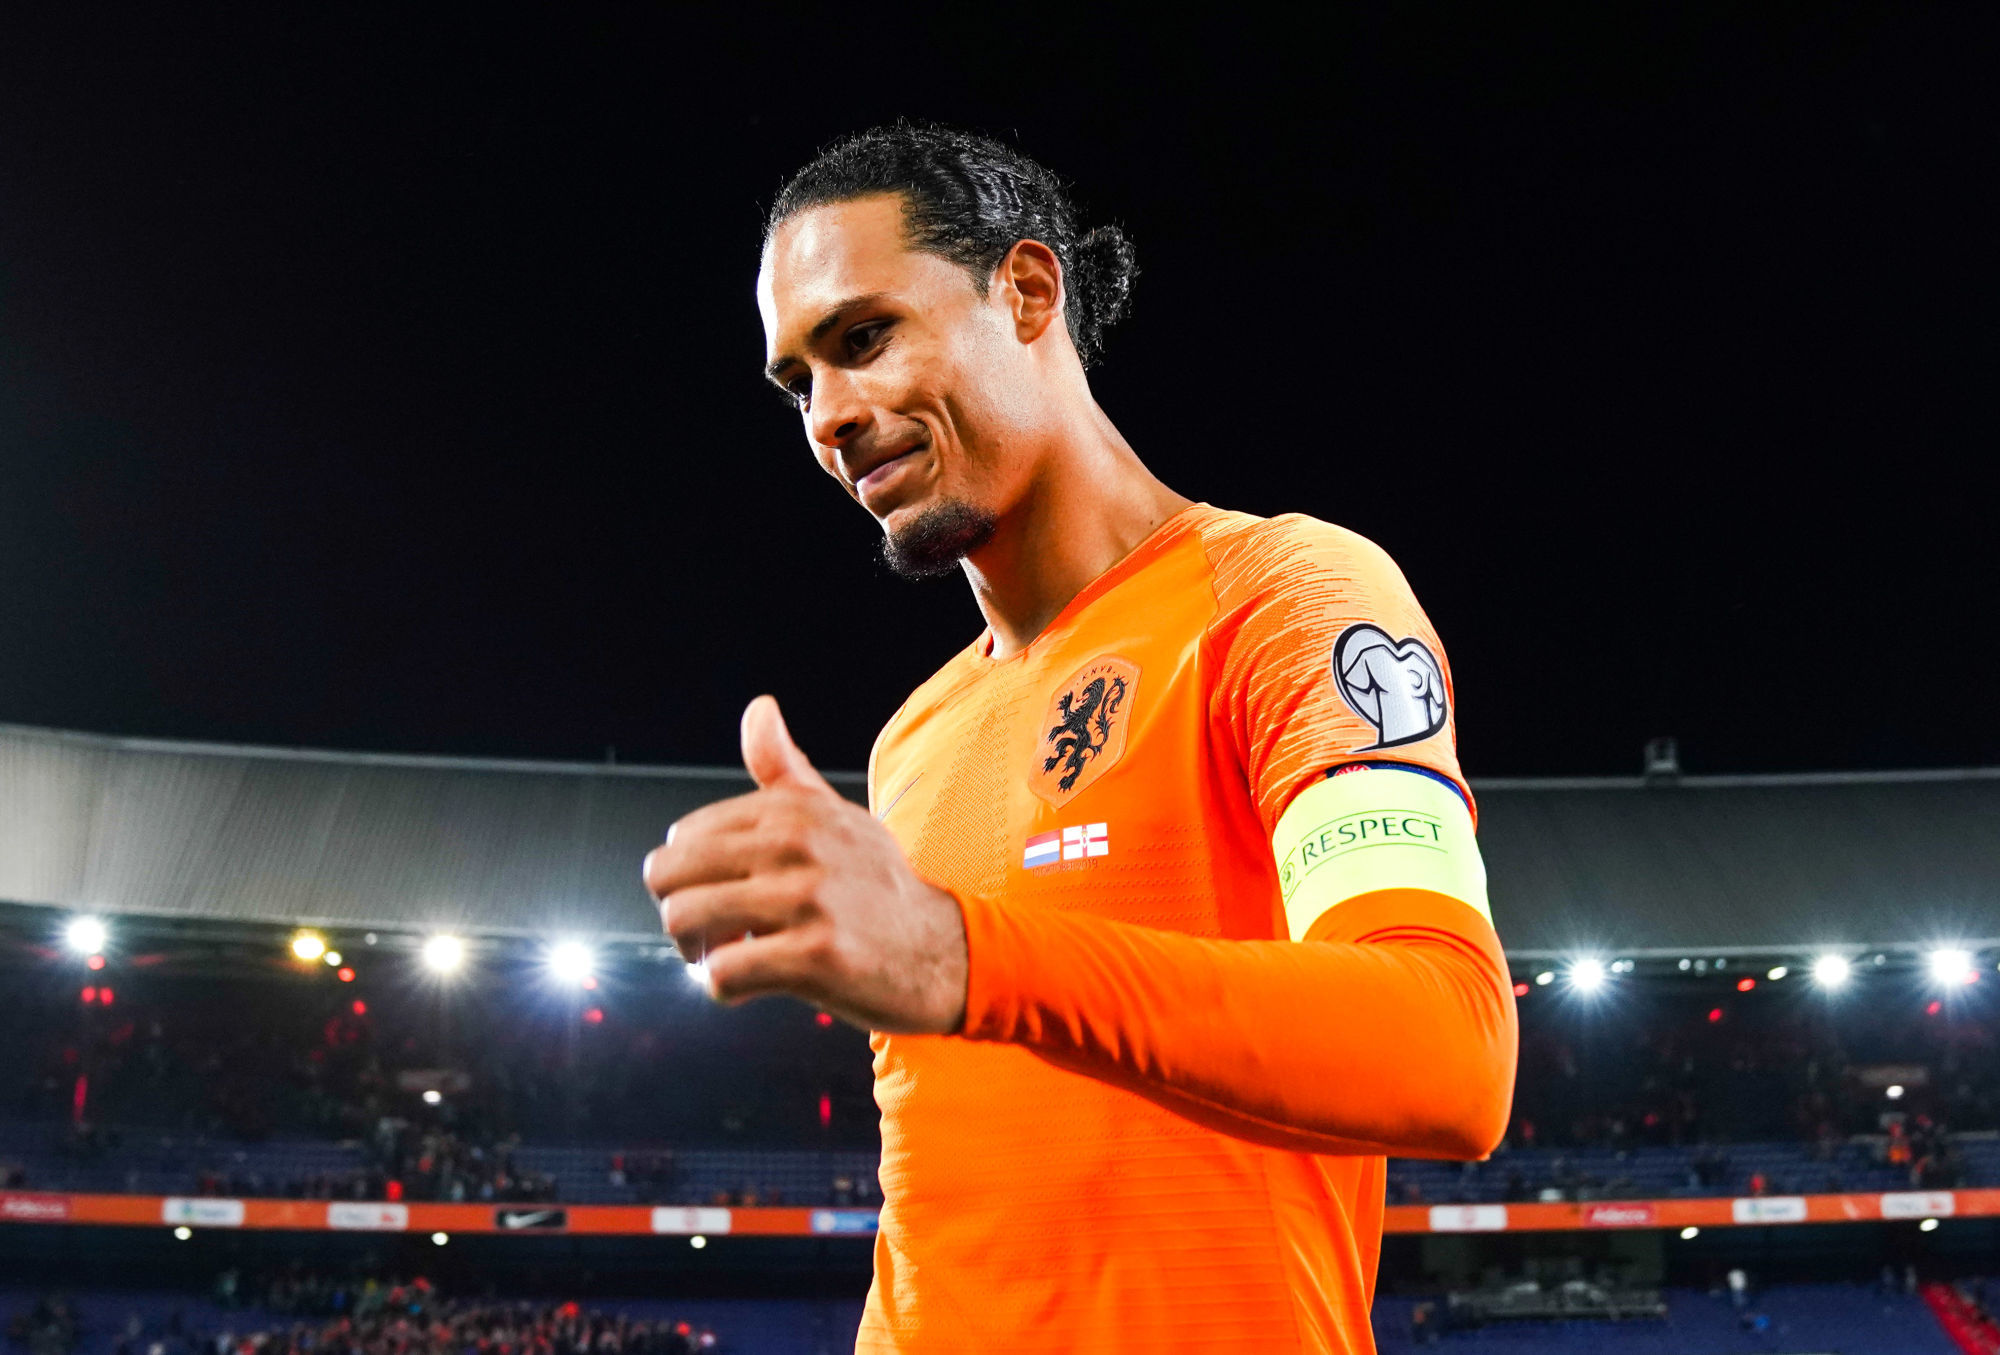 Netherlands' Virgil van Dijk walks off after the UEFA Euro 2020 qualifying, group C match at the Stadion Feijenoord, Rotterdam. 

Photo by Icon Sport - Virgil VAN DIJK - De Kuip - Rotterdam (Pays Bas)